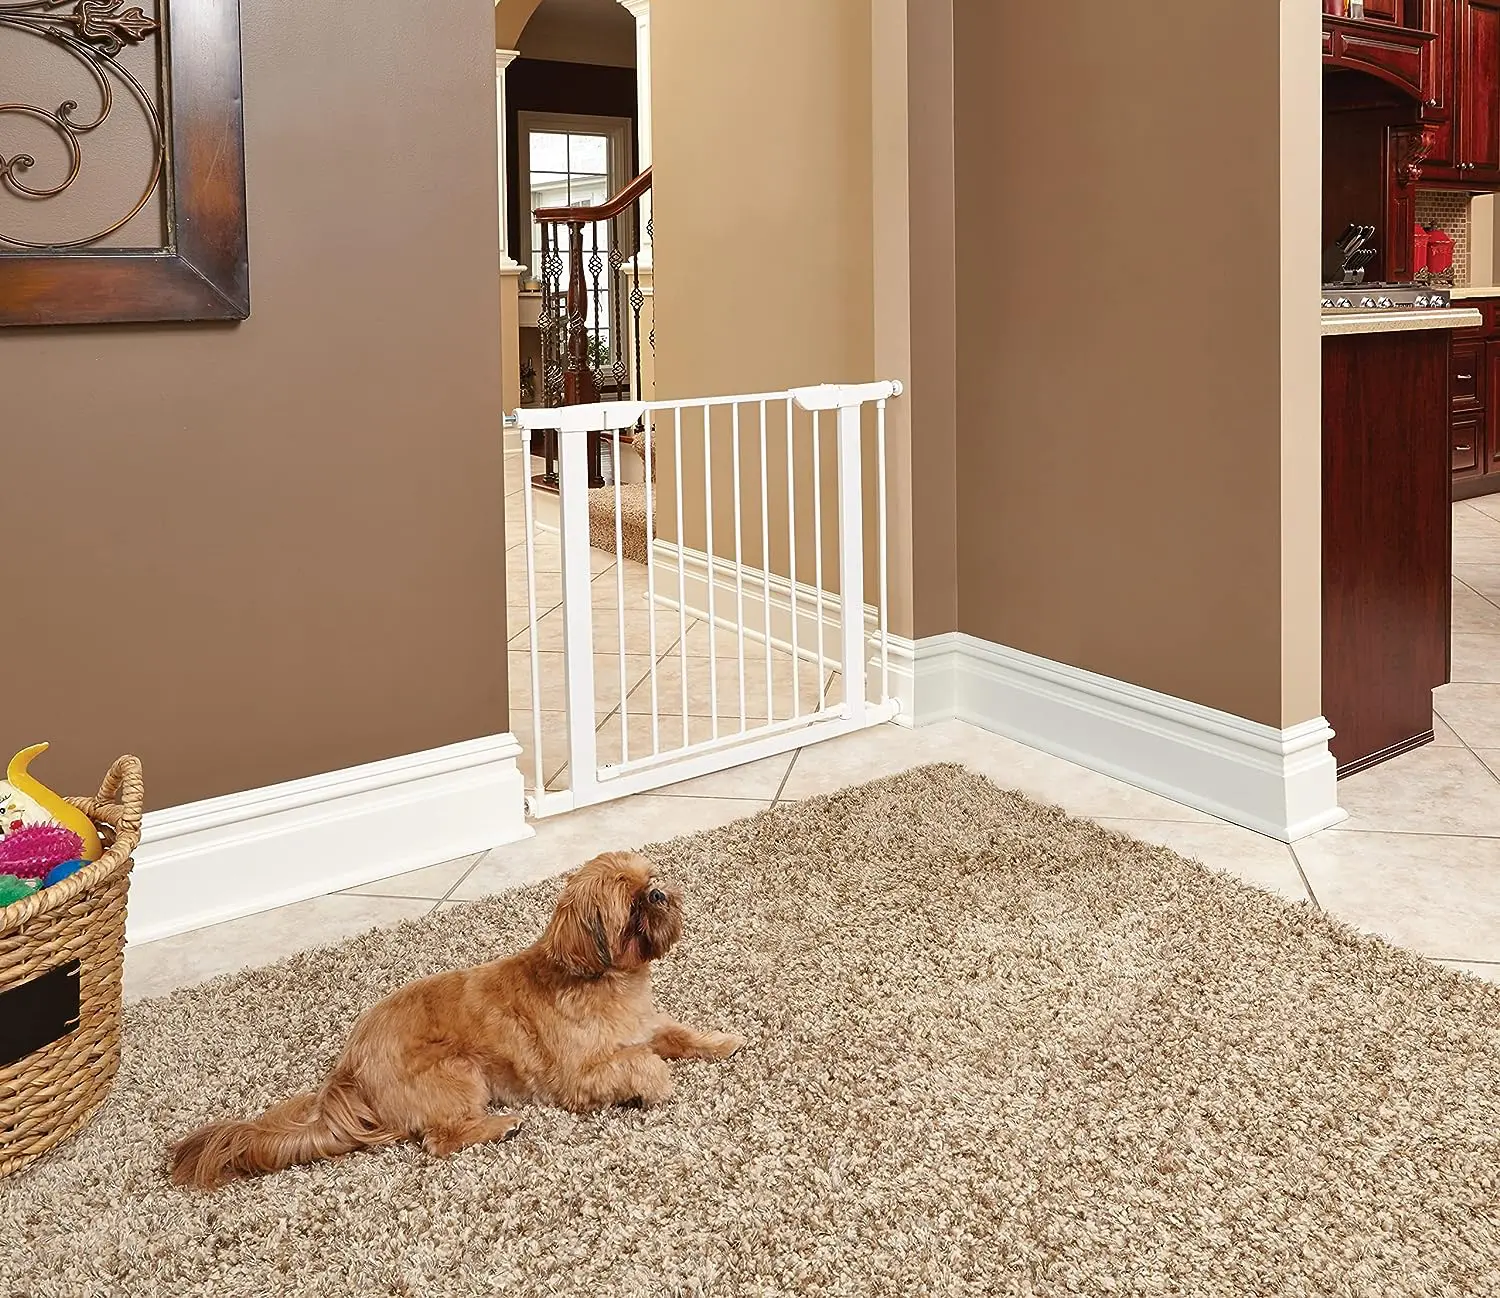 Is Your Home Bulldog-Proof? Find Out Now!